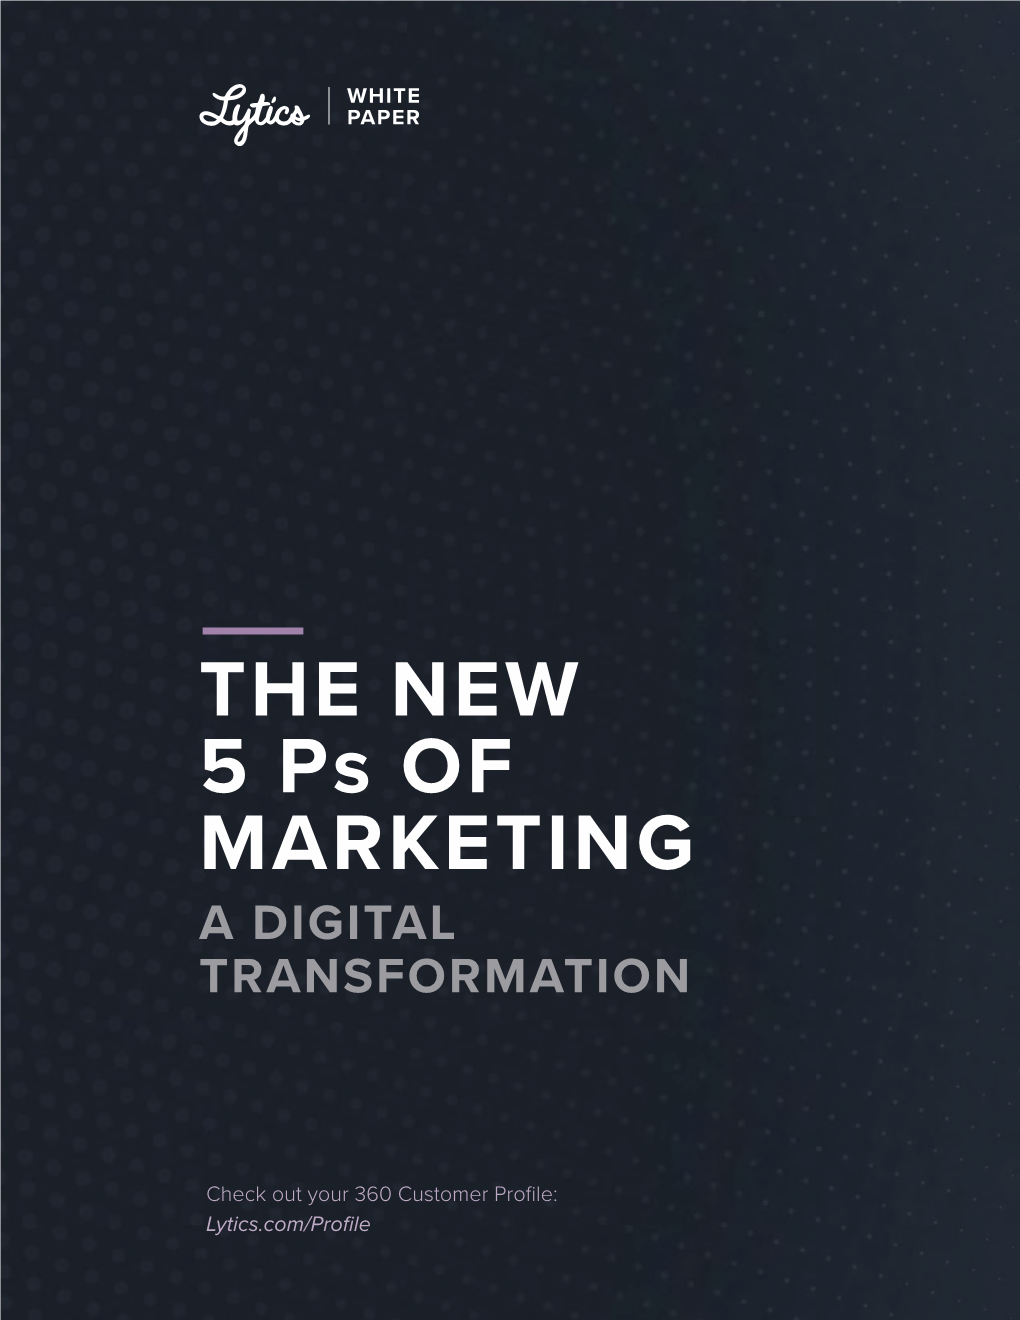 THE NEW 5 Ps of MARKETING a DIGITAL TRANSFORMATION